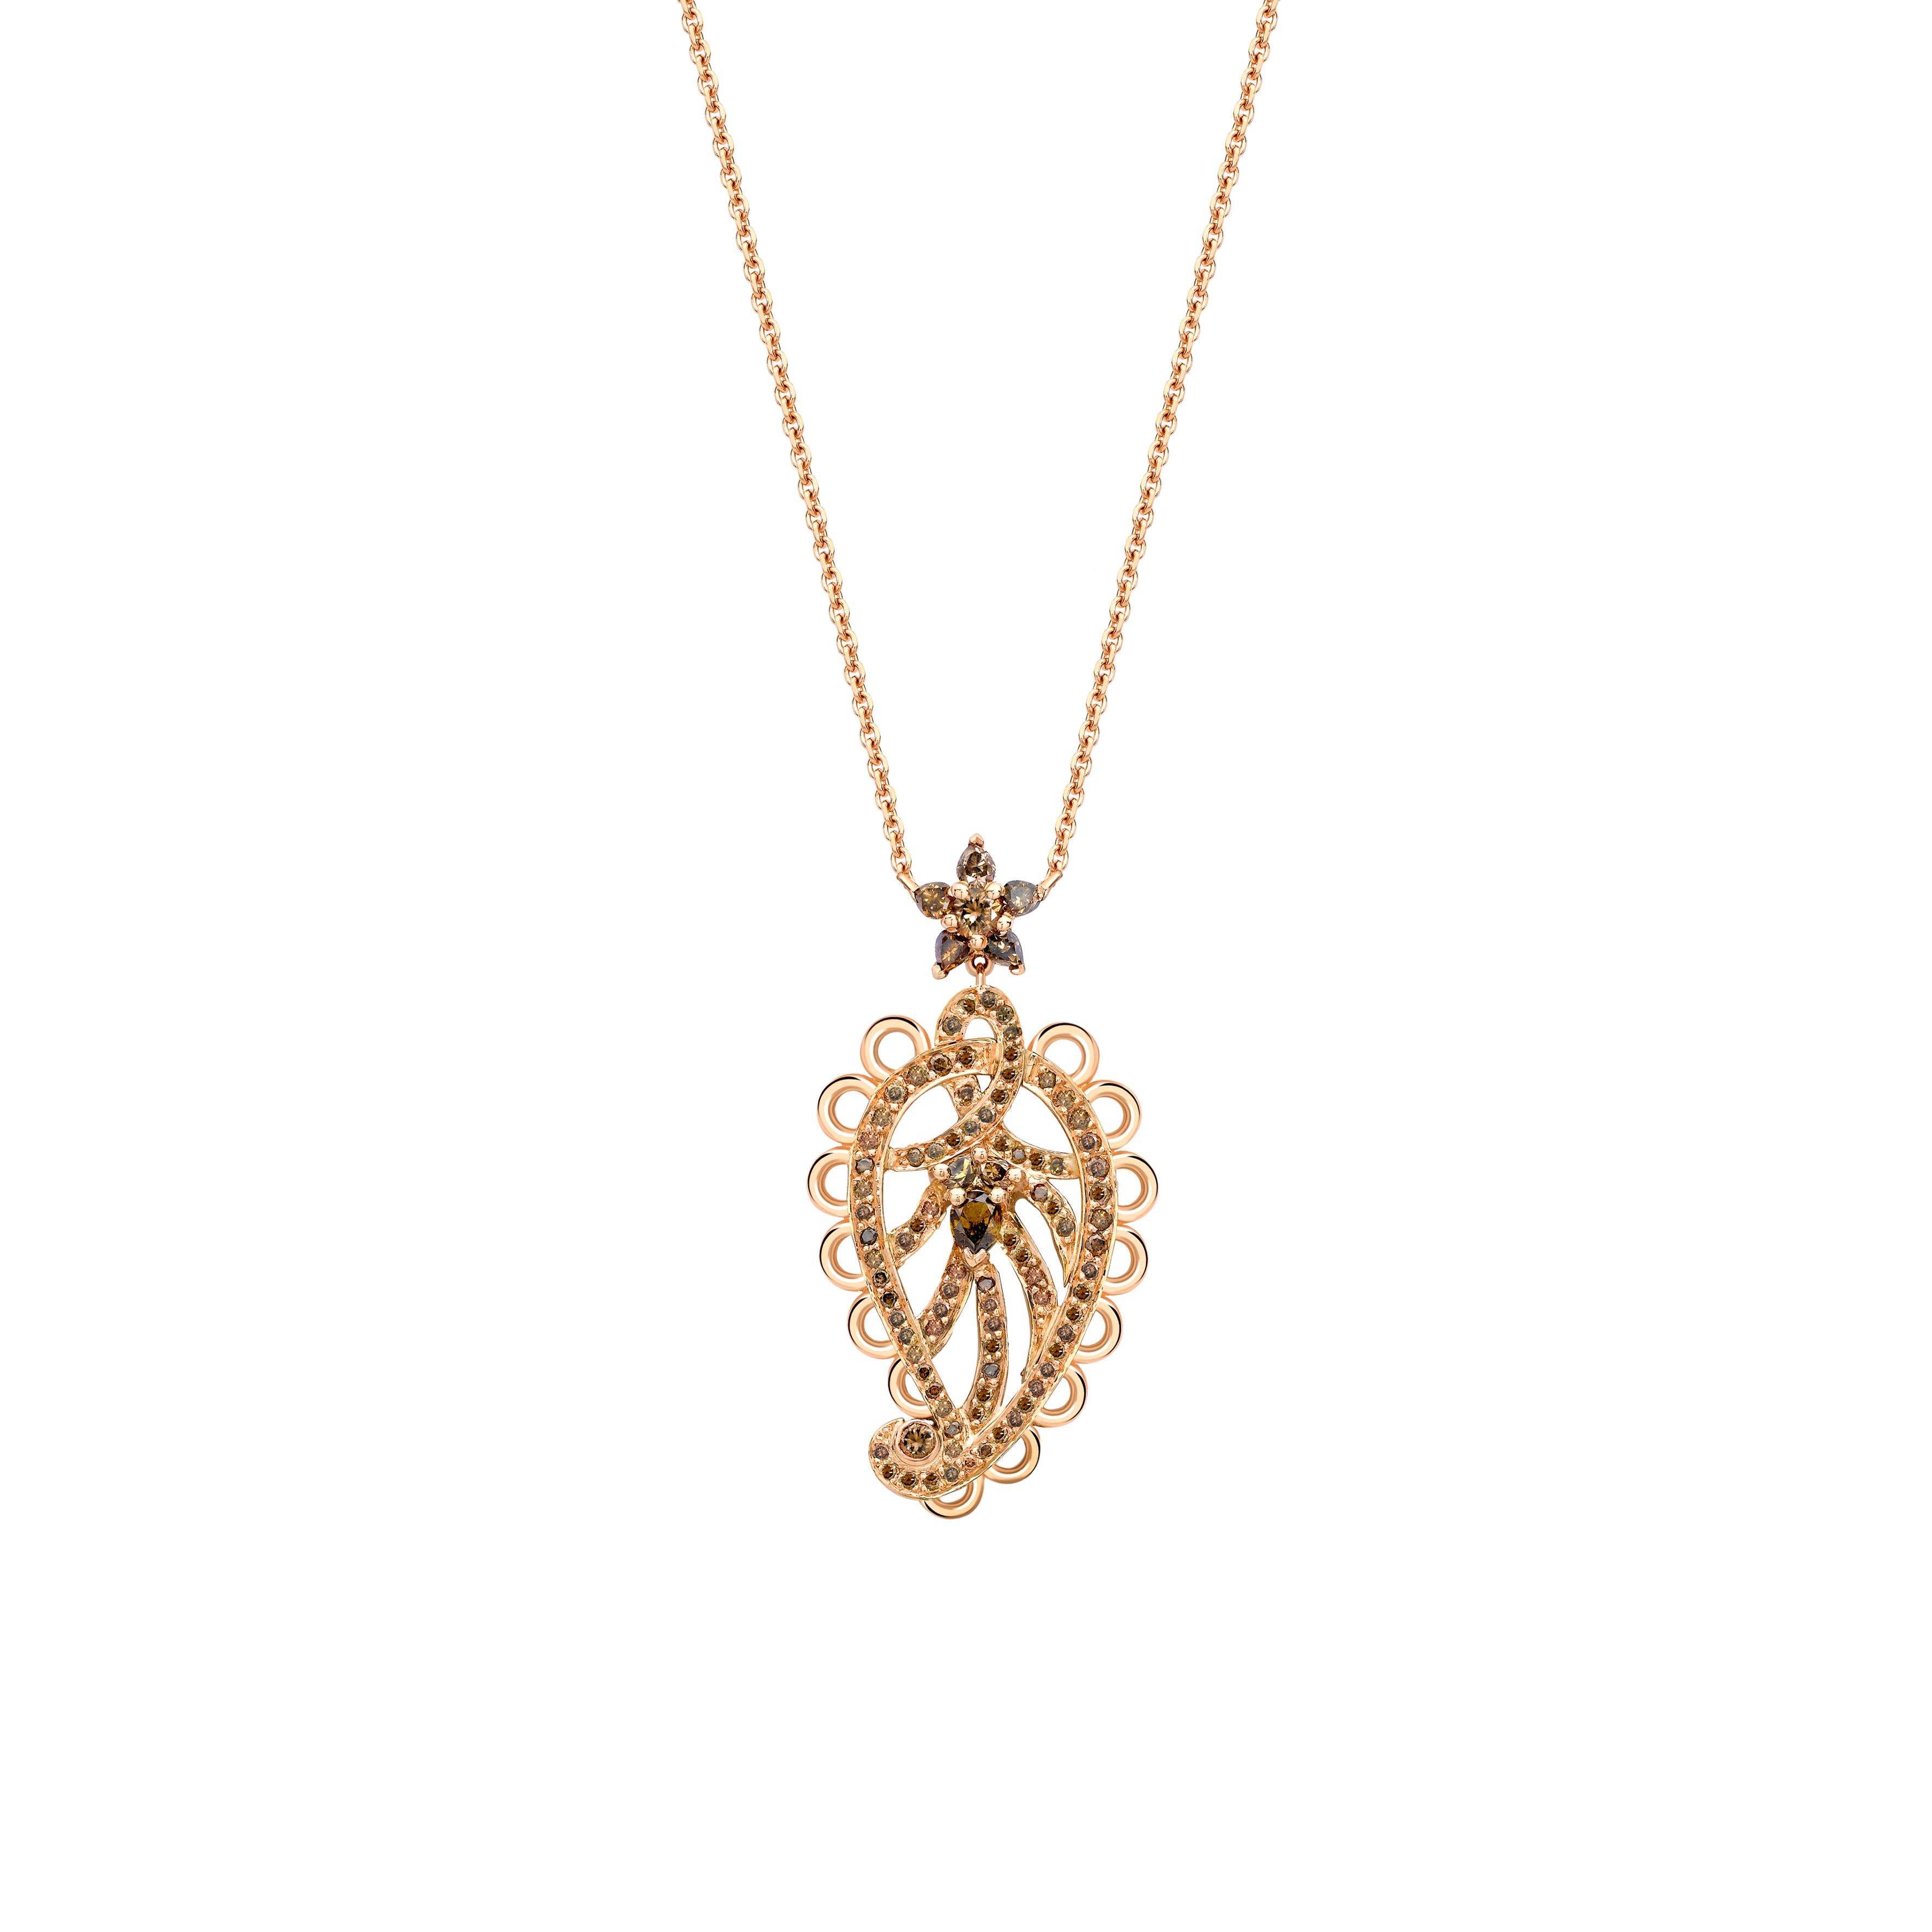 This beautiful set would look striking worn together or as separate pieces. The details of each piece are as follows:

Pendant

The pendant is handcrafted from 18ct rose gold and set with natural cognac diamonds which total 1.46ct. These stones were